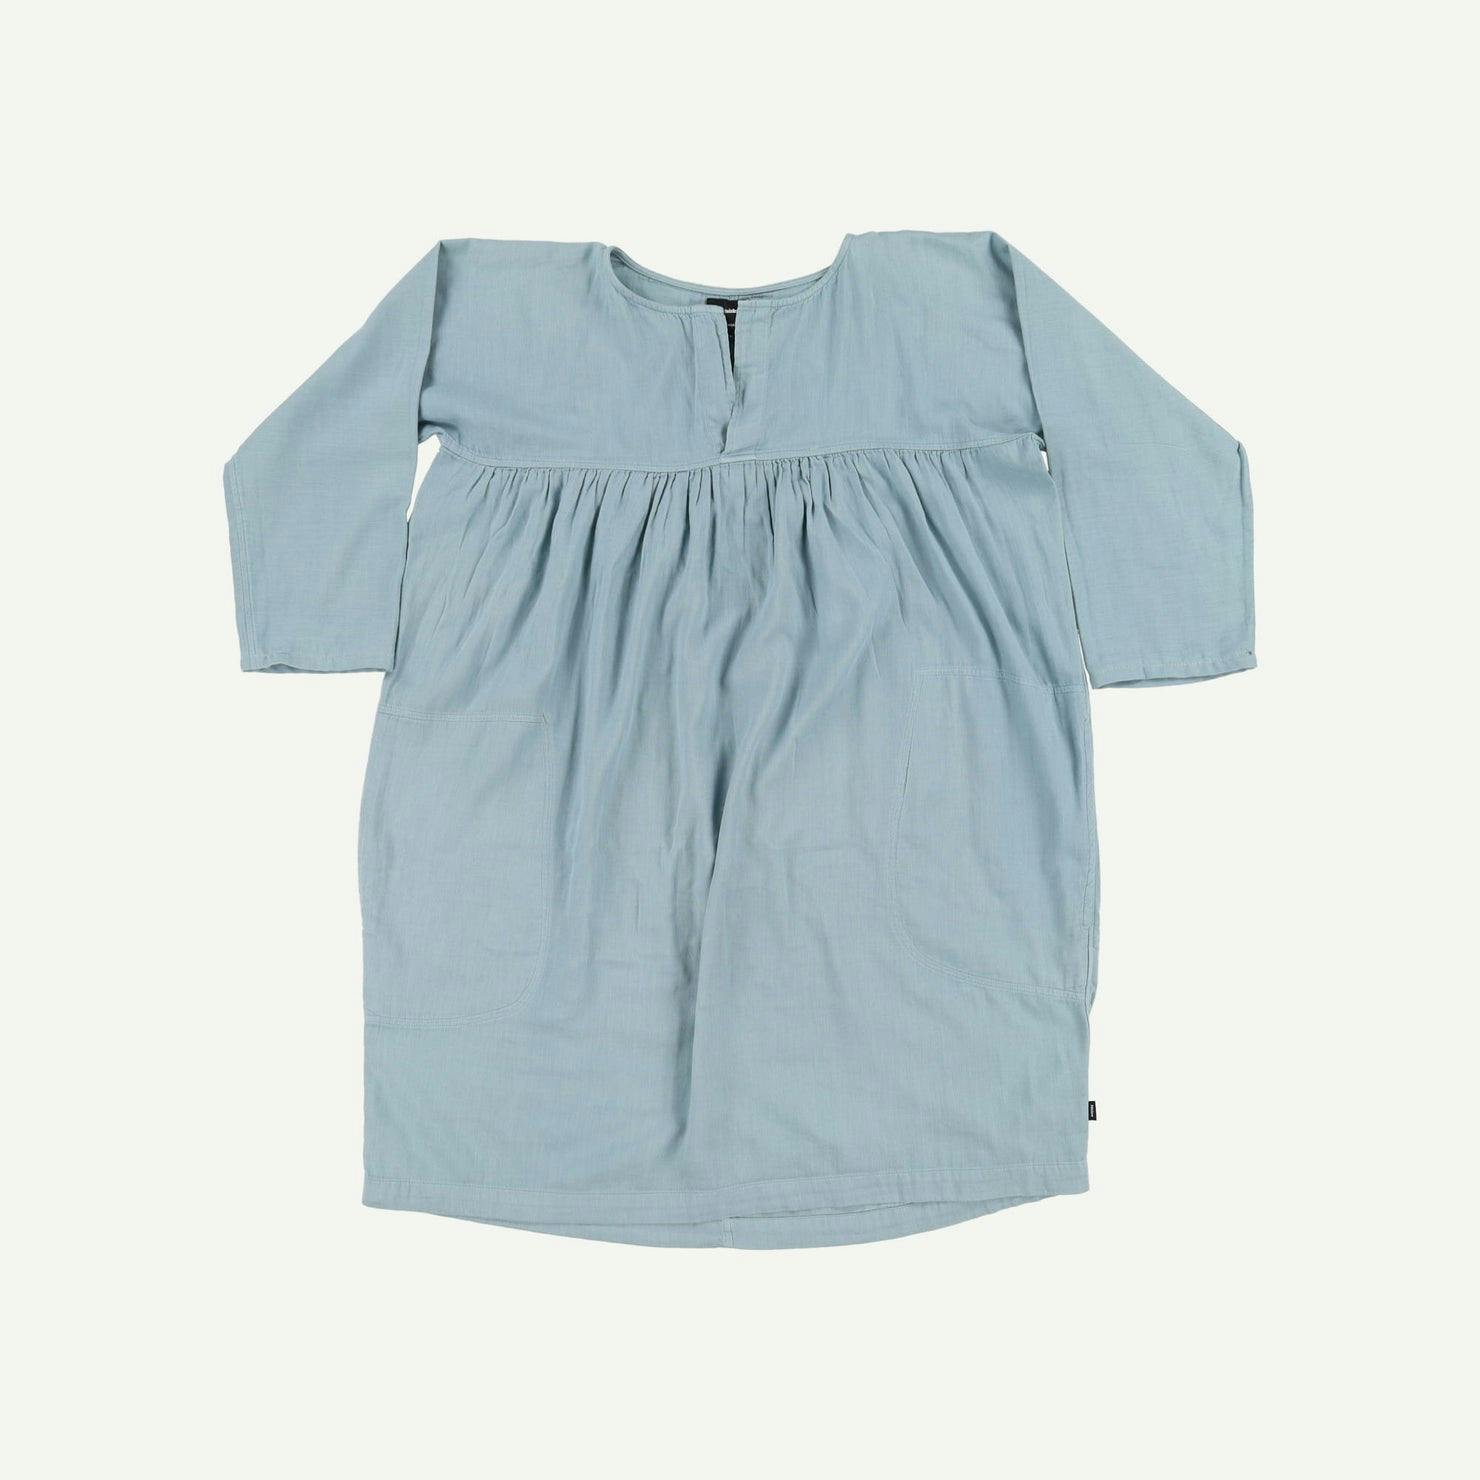 Finisterre Repaired Blue Dress